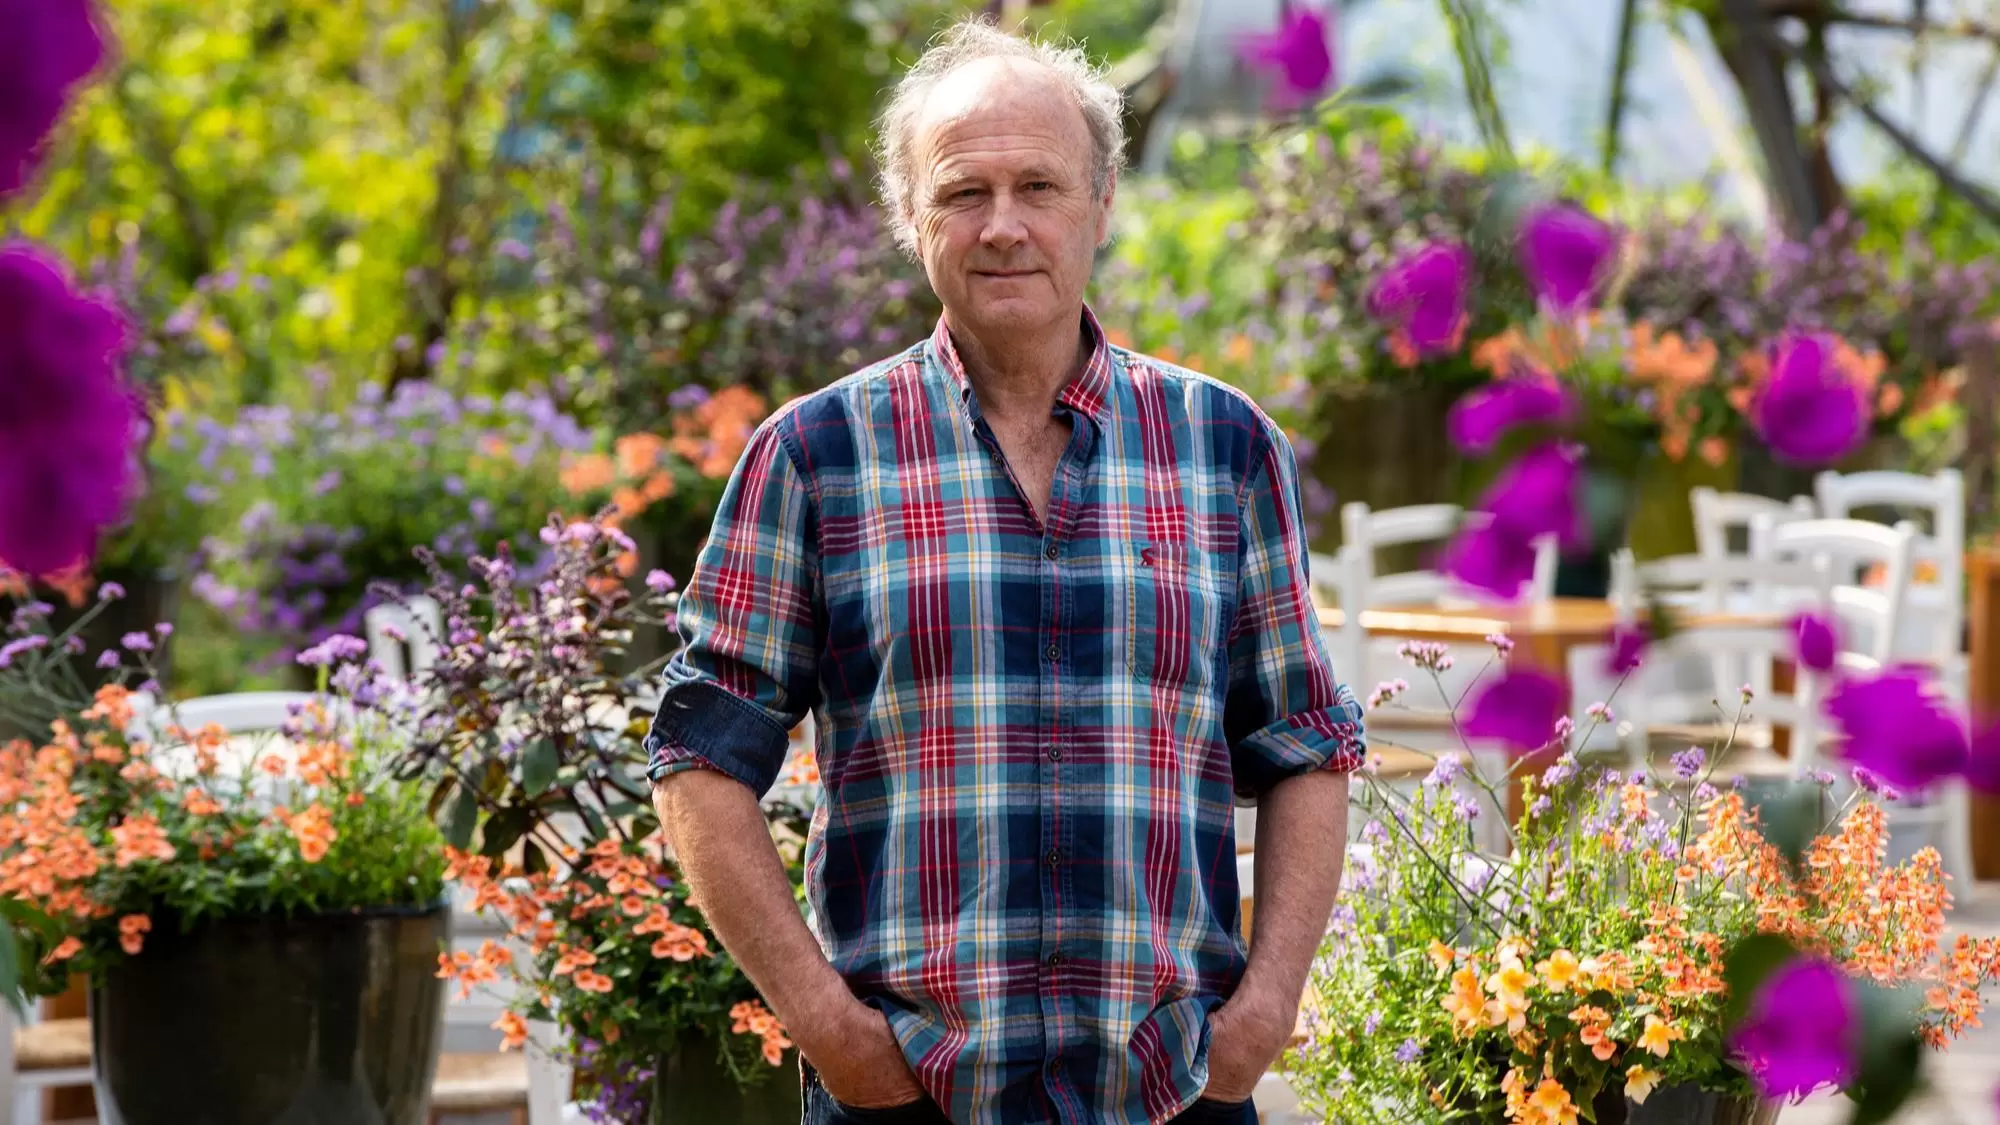 Sir Tim Smit KBE, founder of The Eden Project, smiling at the camera, wearing blue and red checkered shirt.